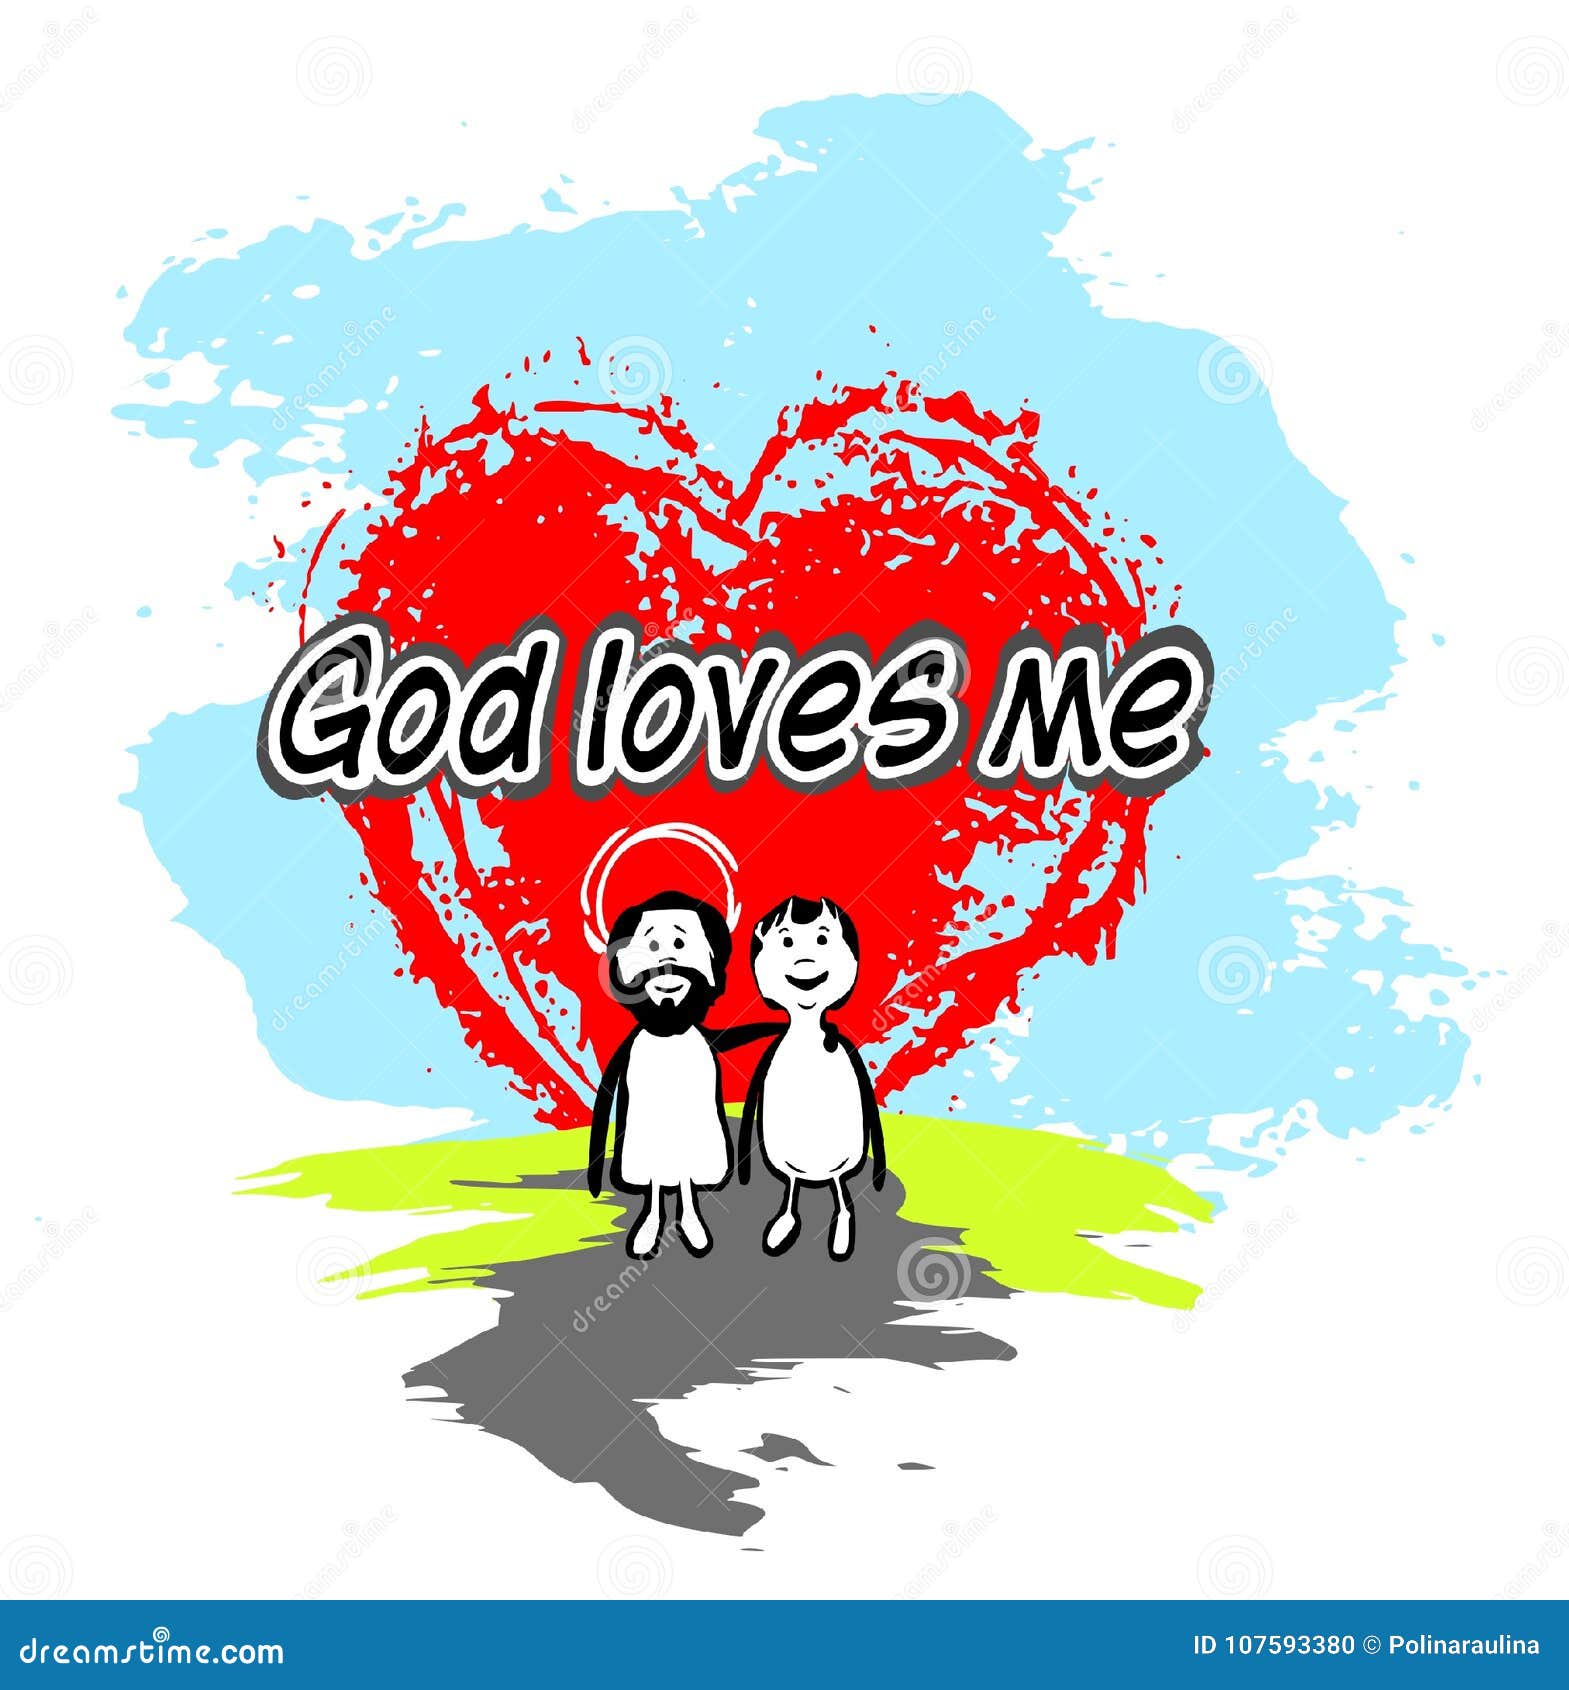 God loves me stock photo. Illustration of carries, abstract - 107593380